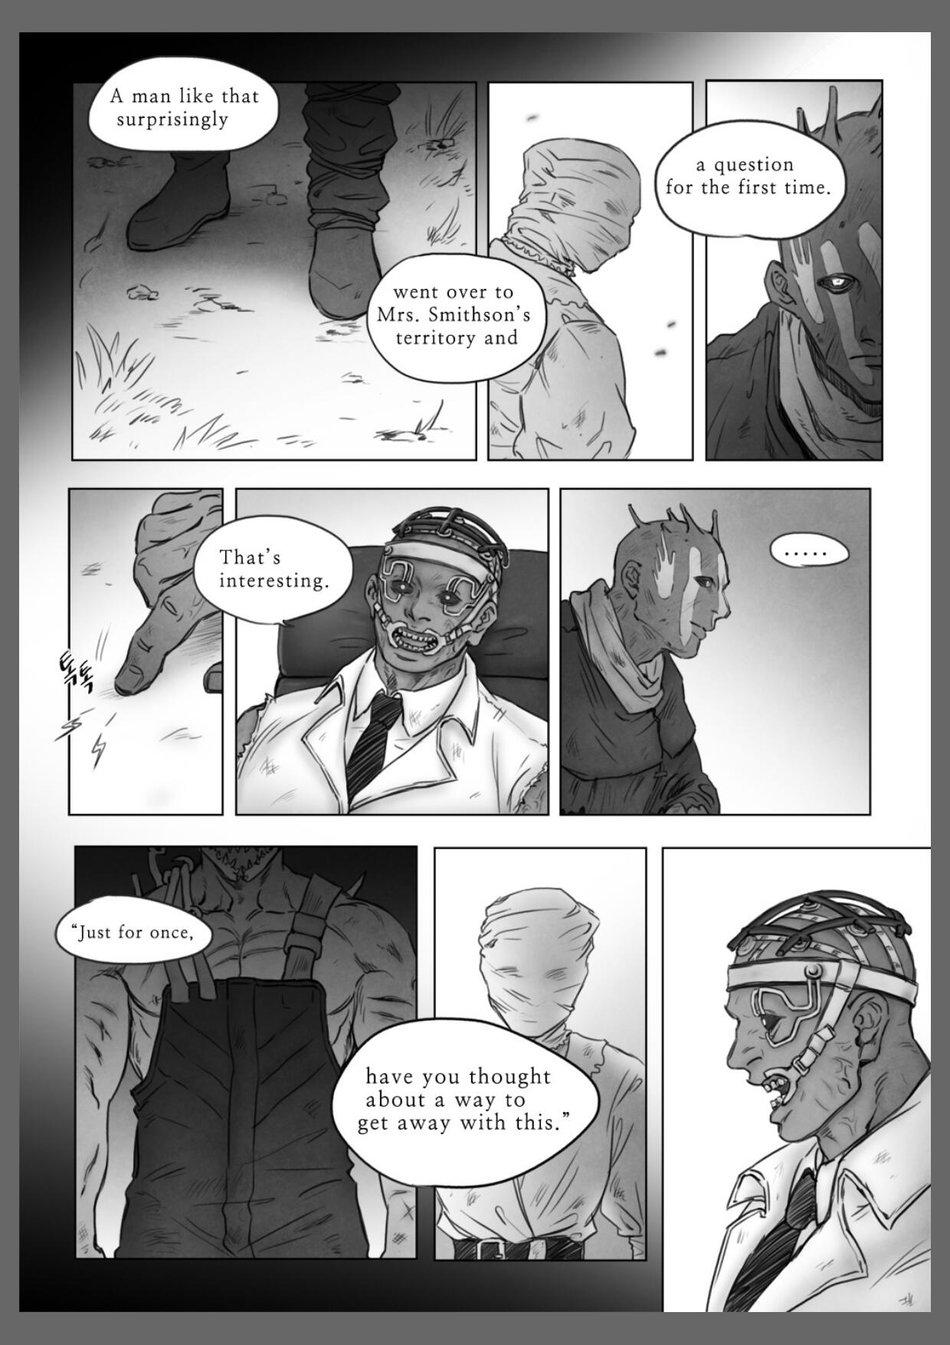 Nasty Bring Me to Death - Dead by daylight Amature Allure - Page 4